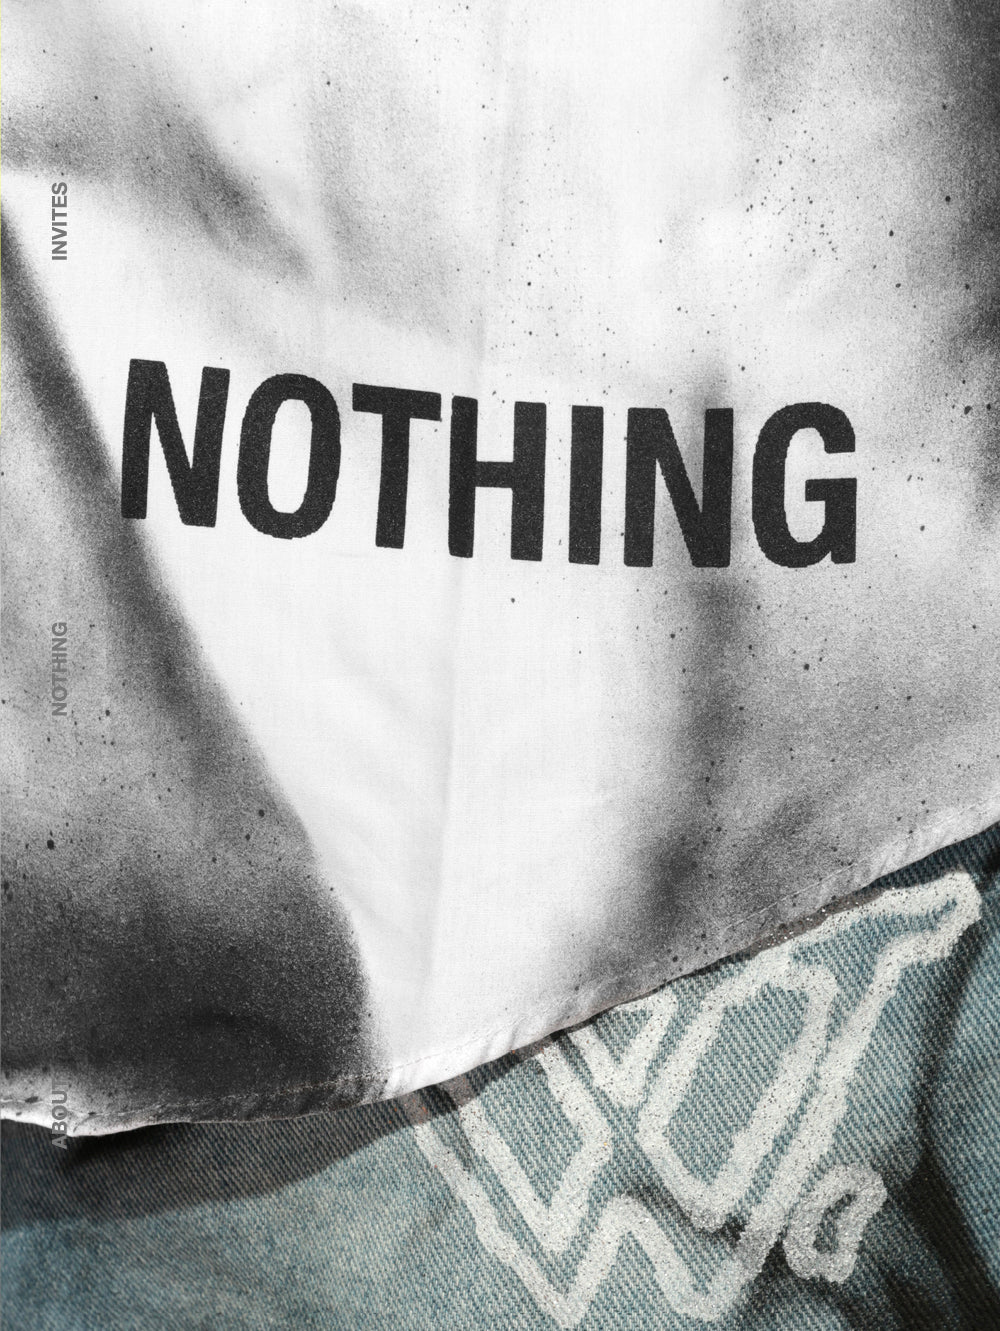 SHIRT // ABOUT NOTHING X WORLDXIT